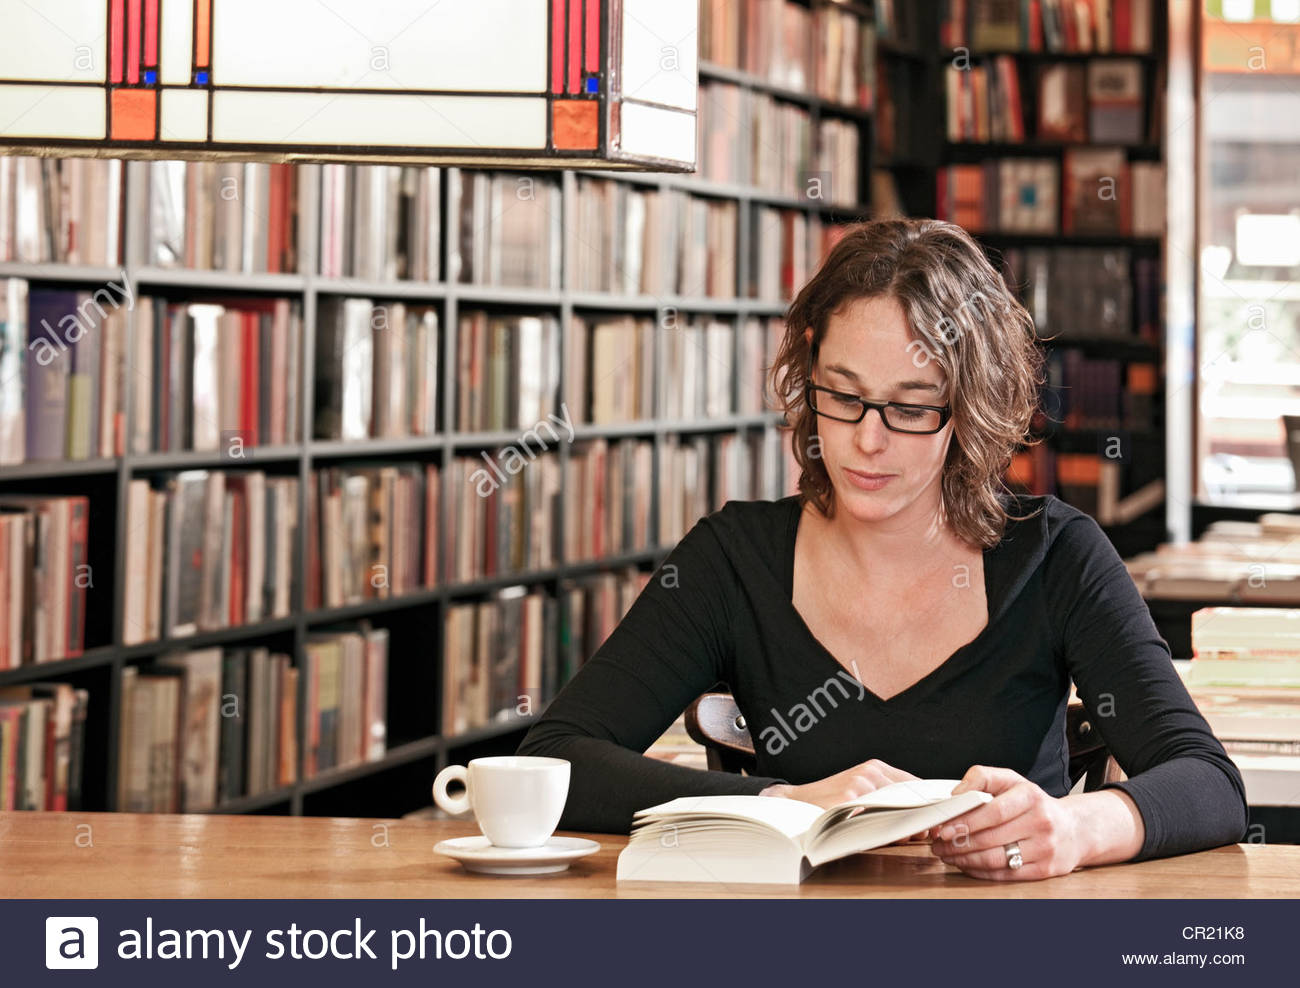 woman-reading-in-bookstore-cafe-CR21K8.j